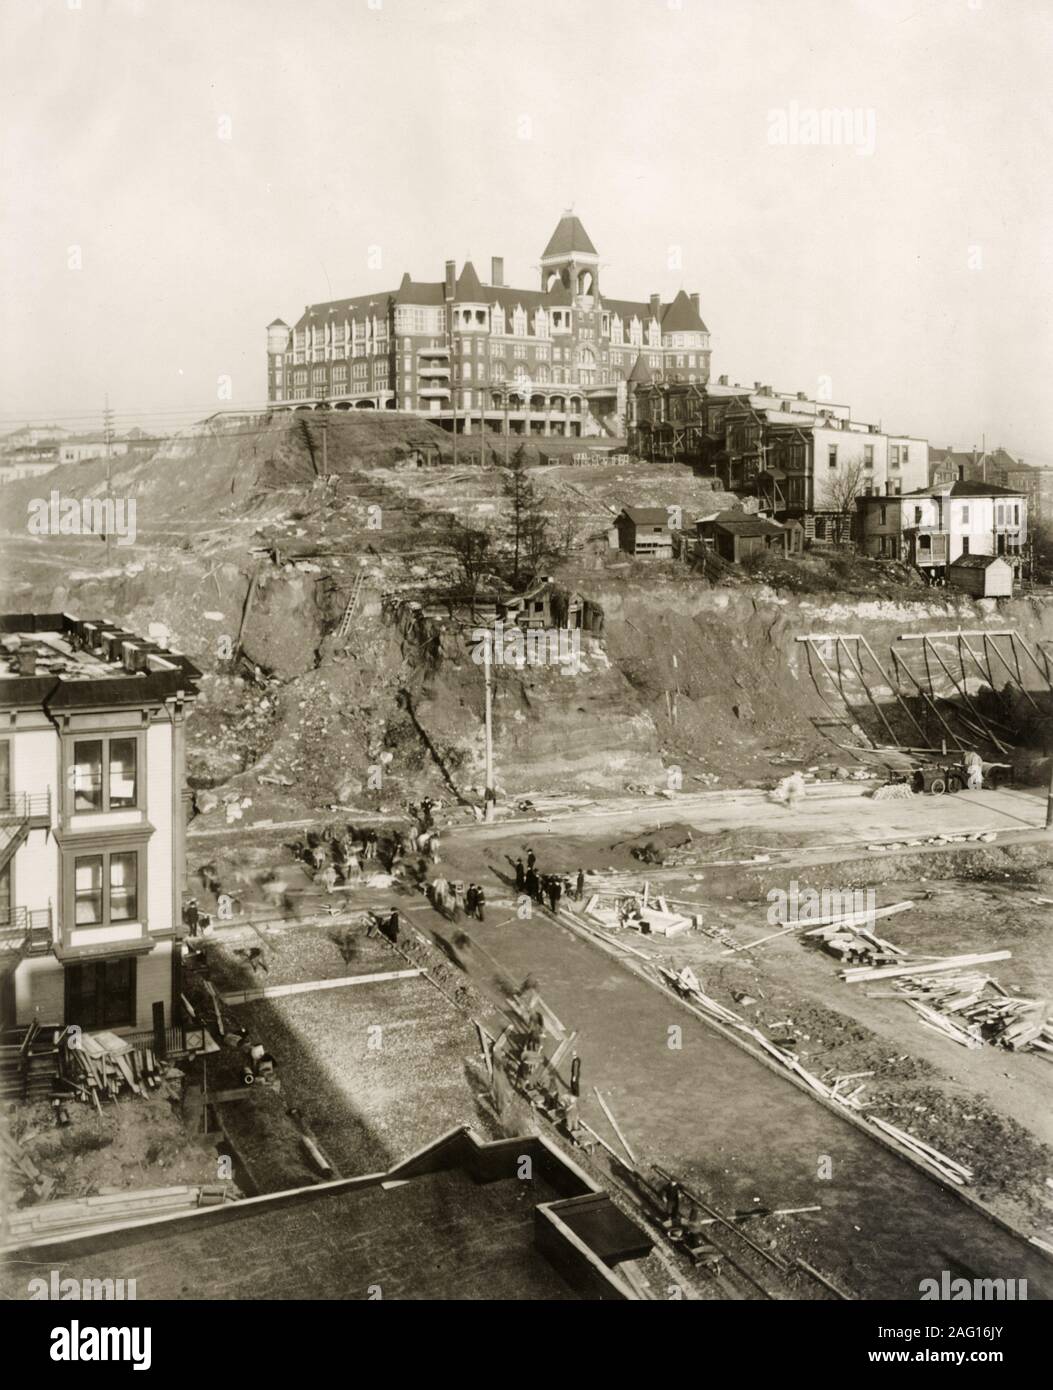 Early 20th century vintage press photograph - view of the Denny regarde underway on 2nd Avenue Seattle, with the old Denny / Washington hotel at the top of the hill. Stock Photo